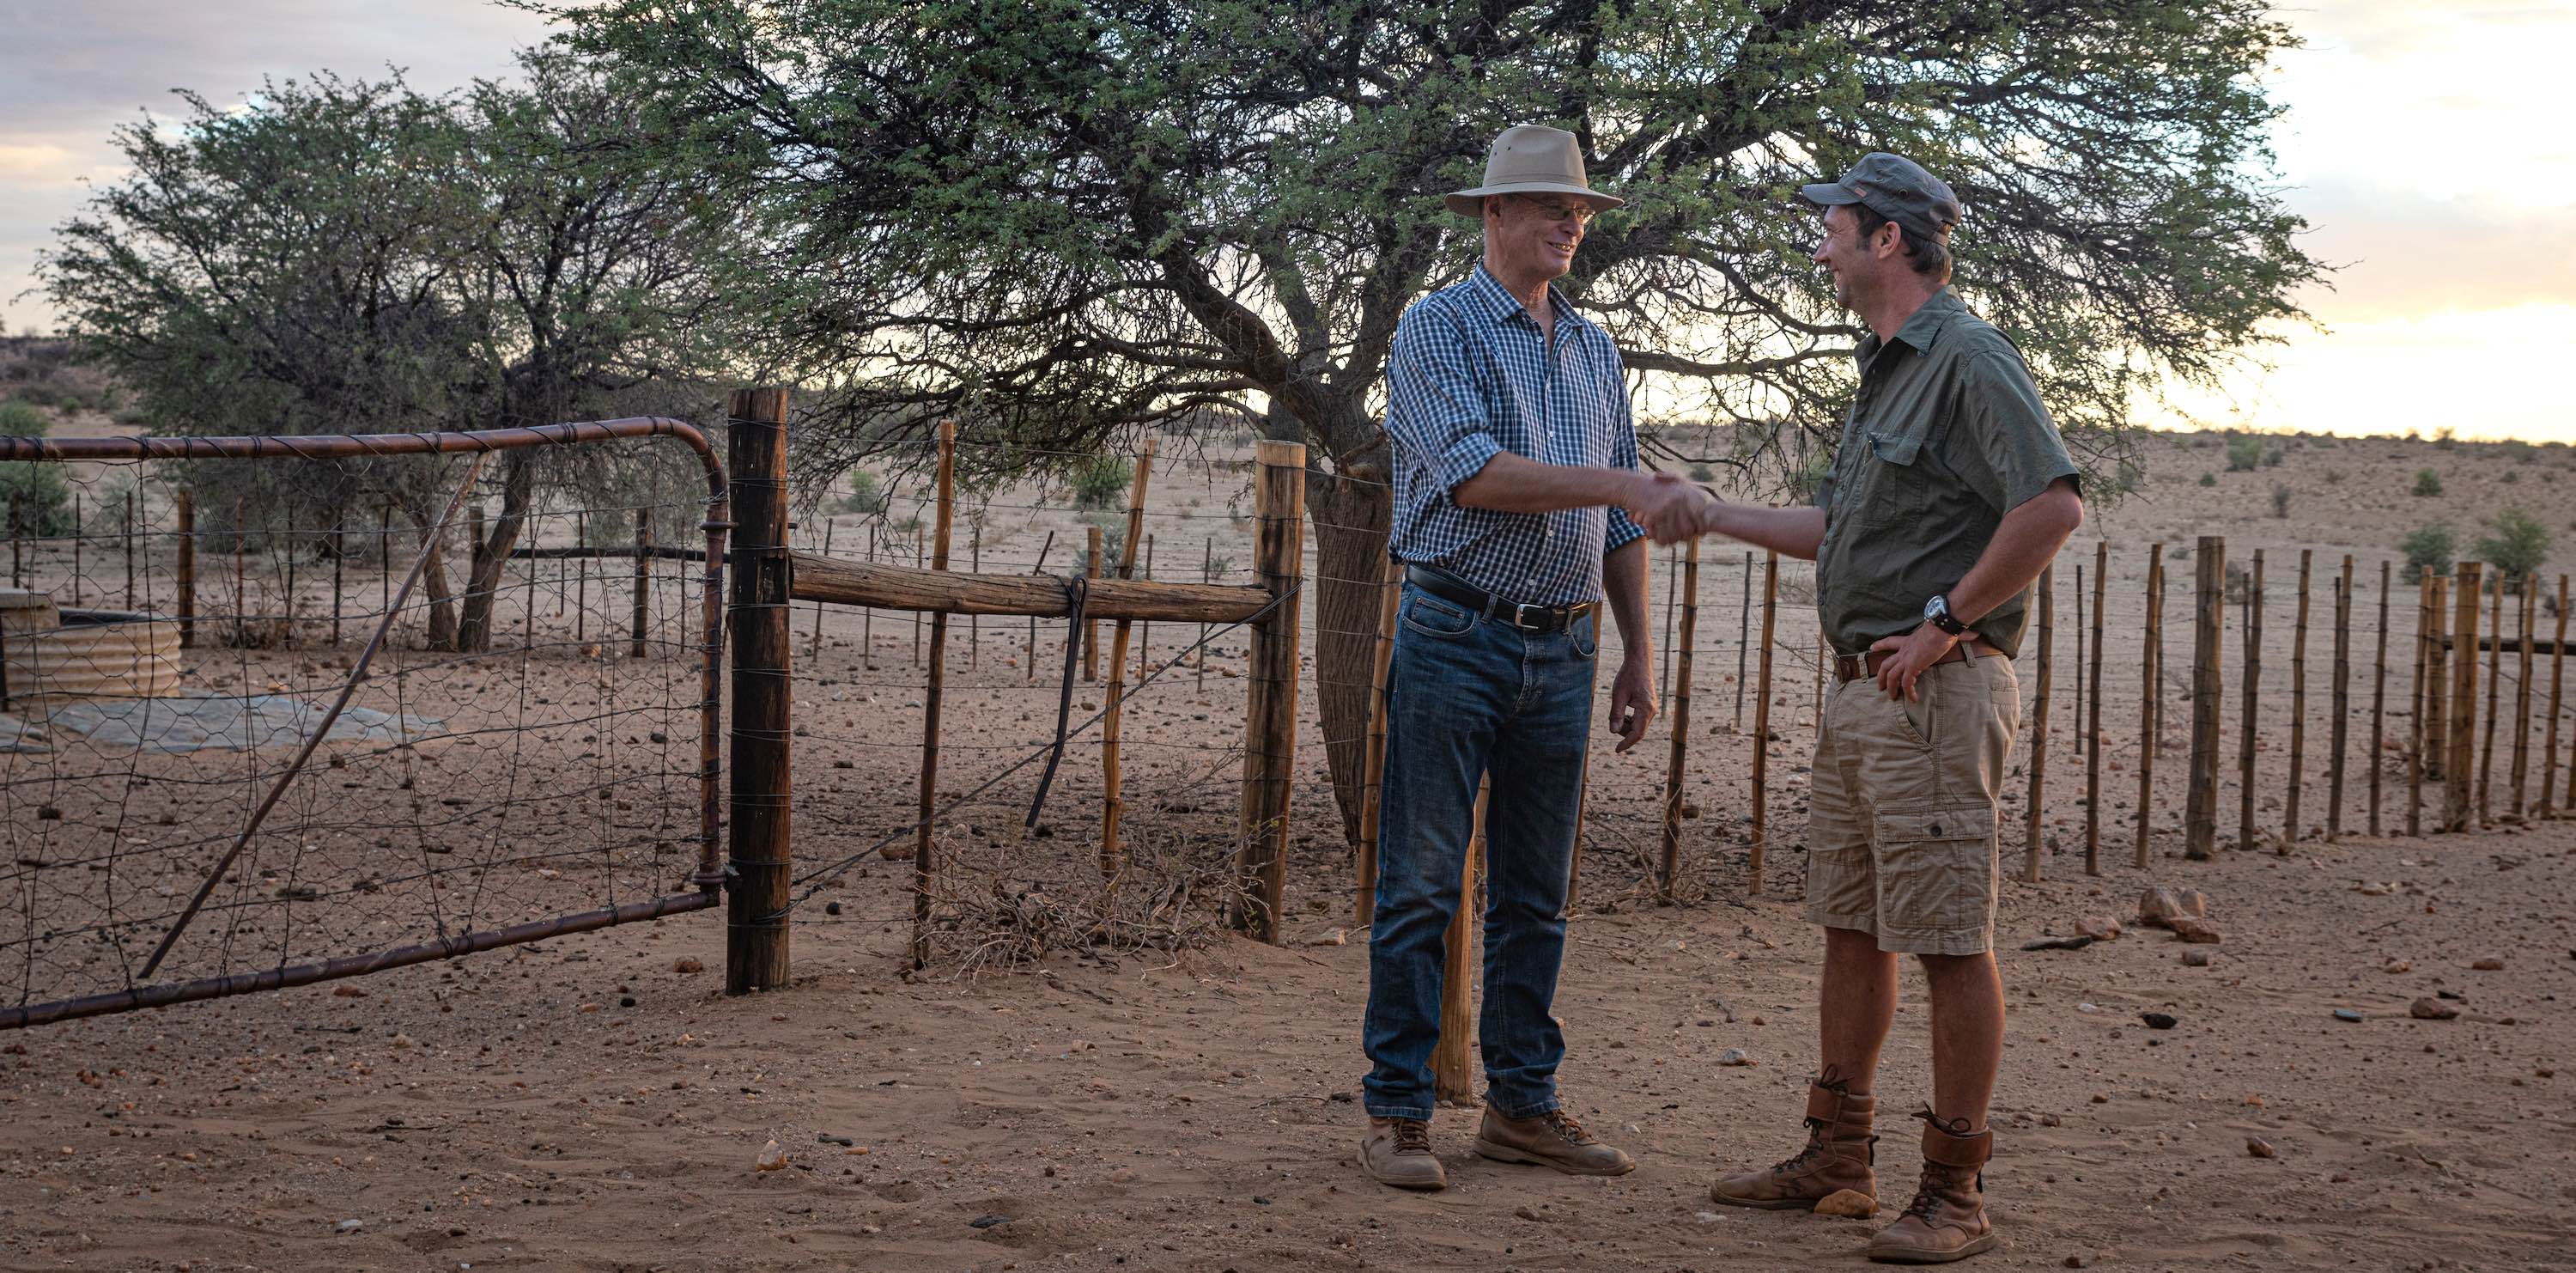 Two men shake hands next to a livestock fence.